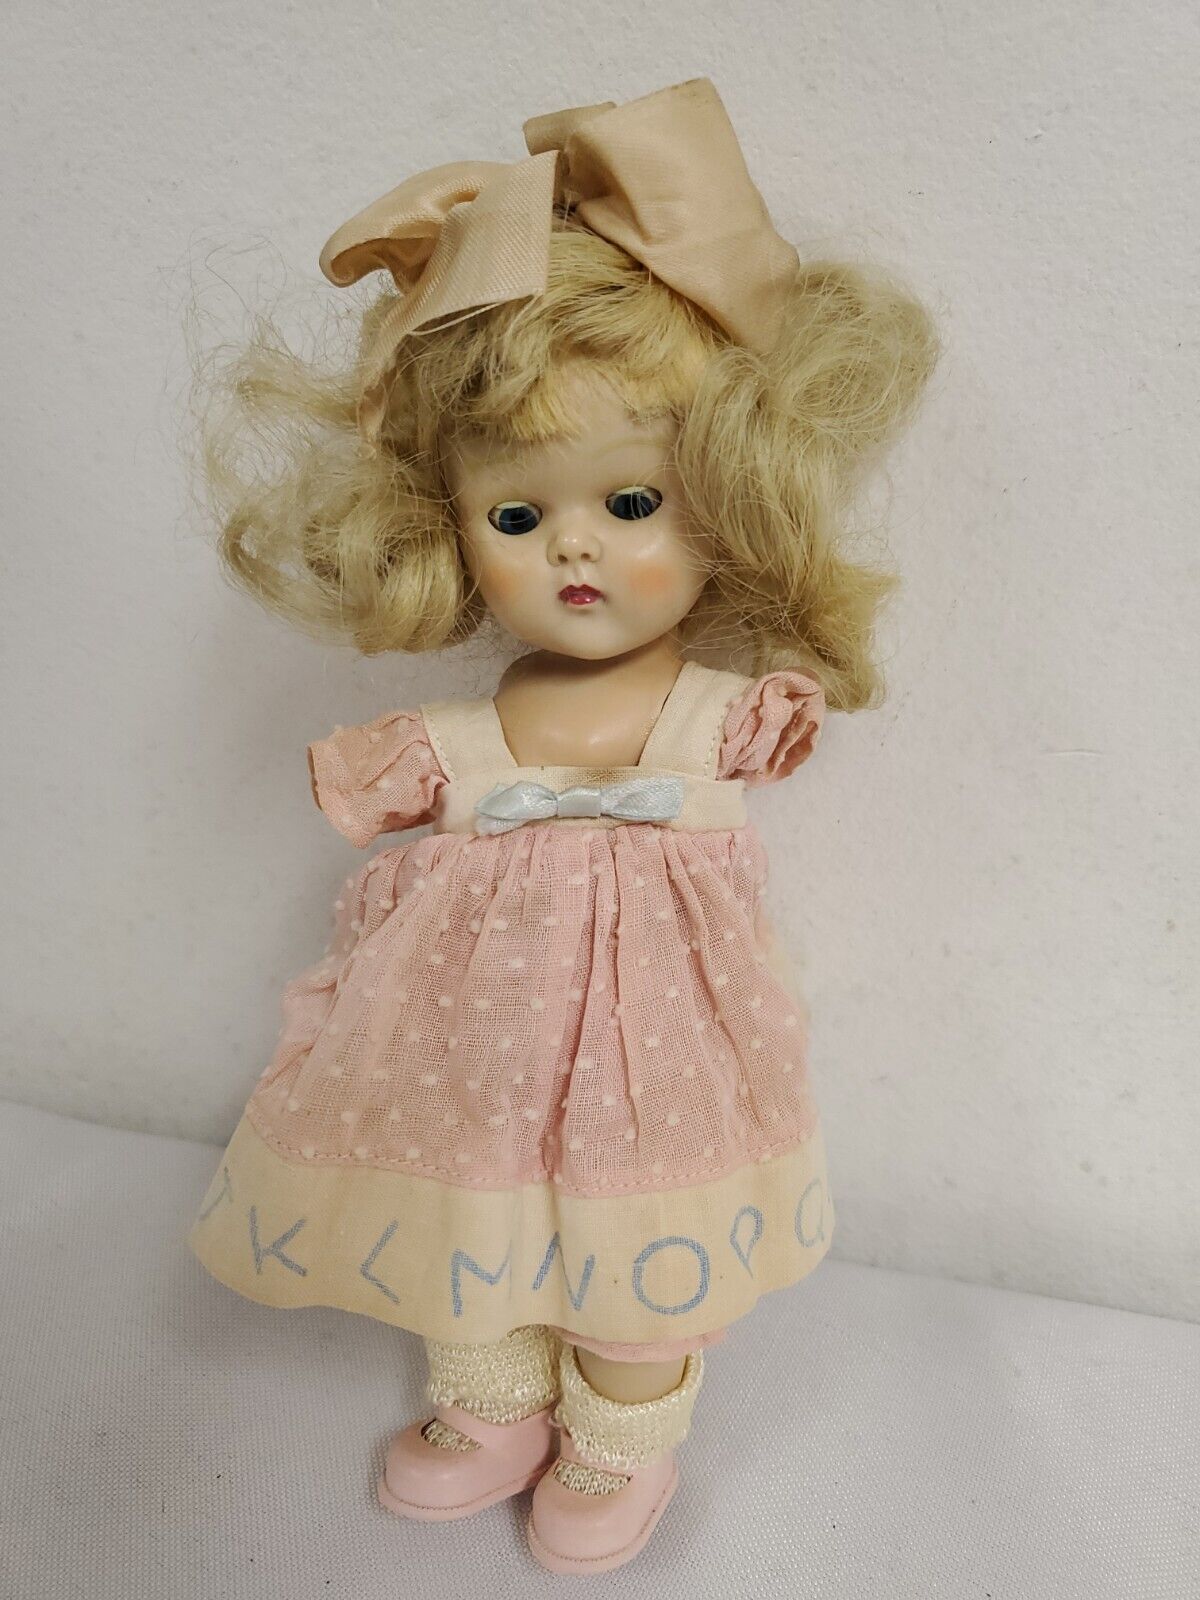 Vintage 1950s 7”  Strung Vogue Ginny Doll in Vogue Tagged ABC Dress Missing Arms